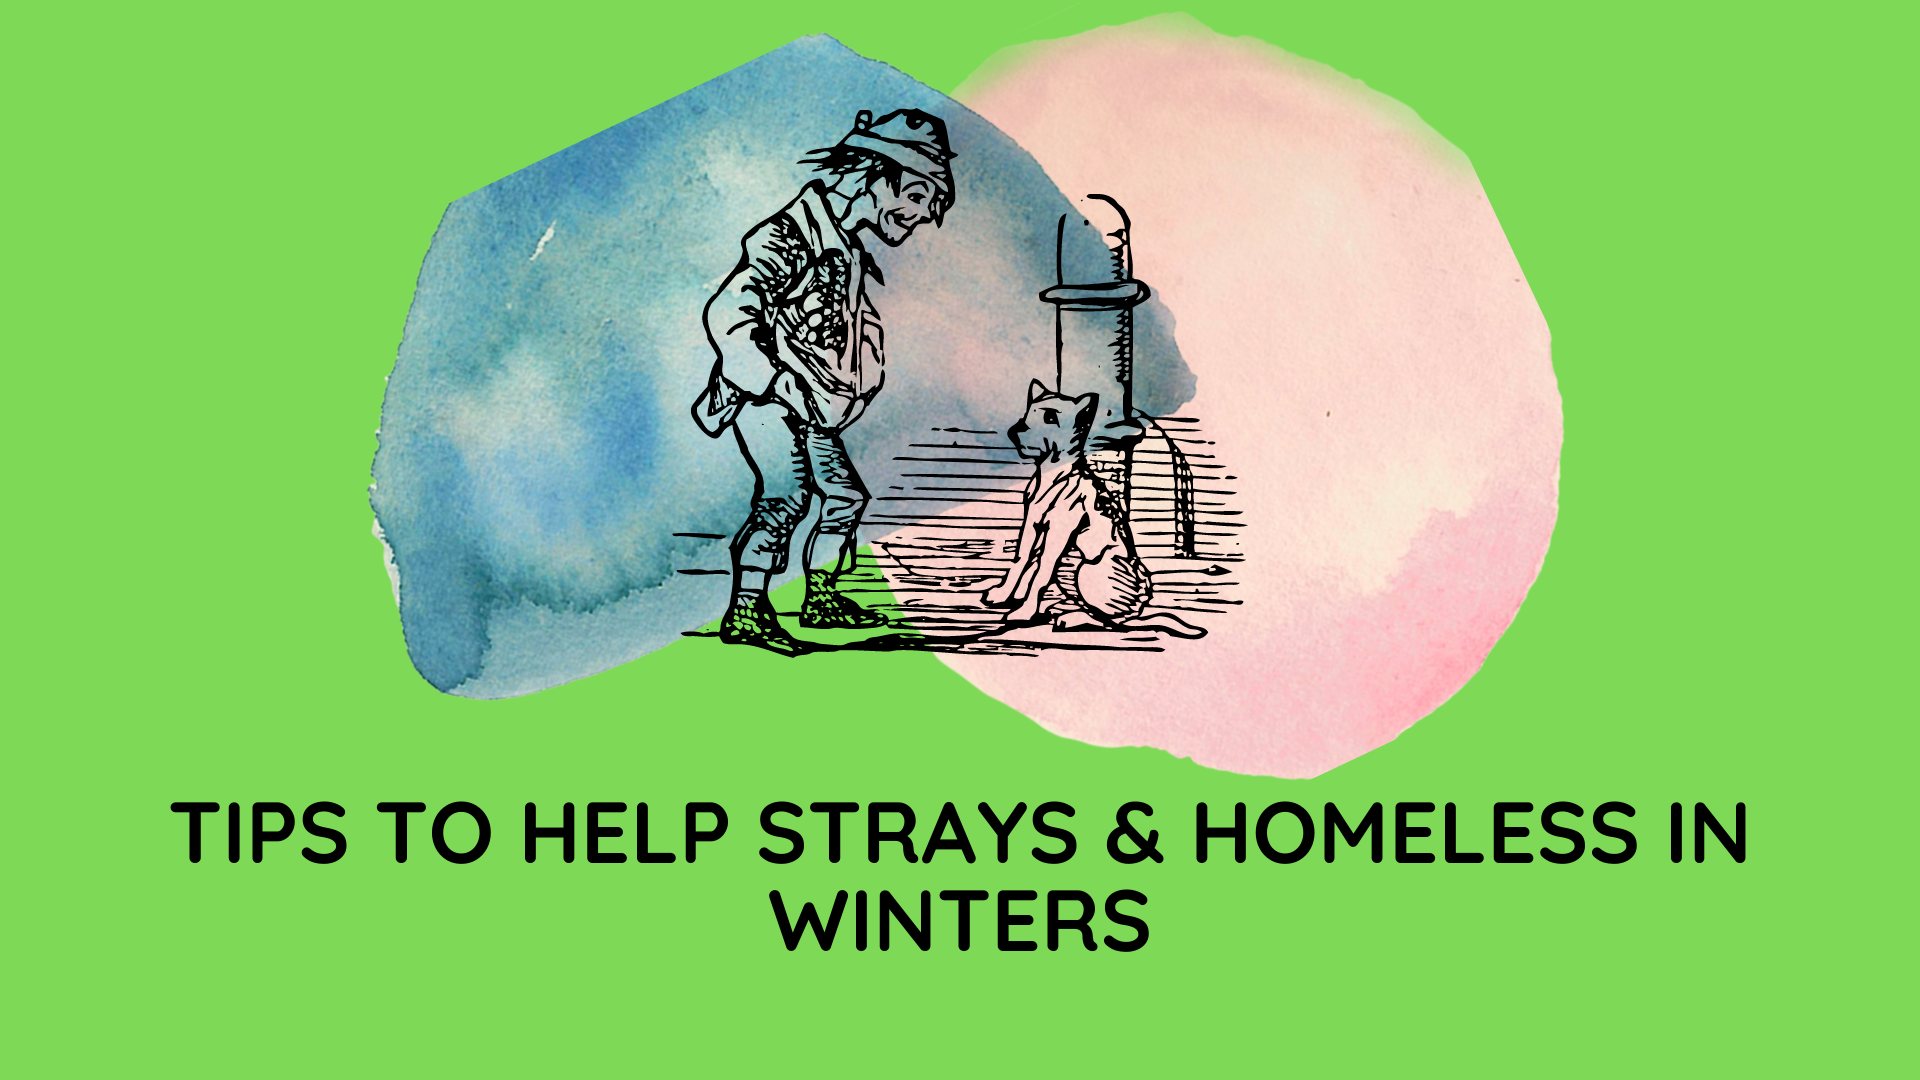 How to help strays in winter